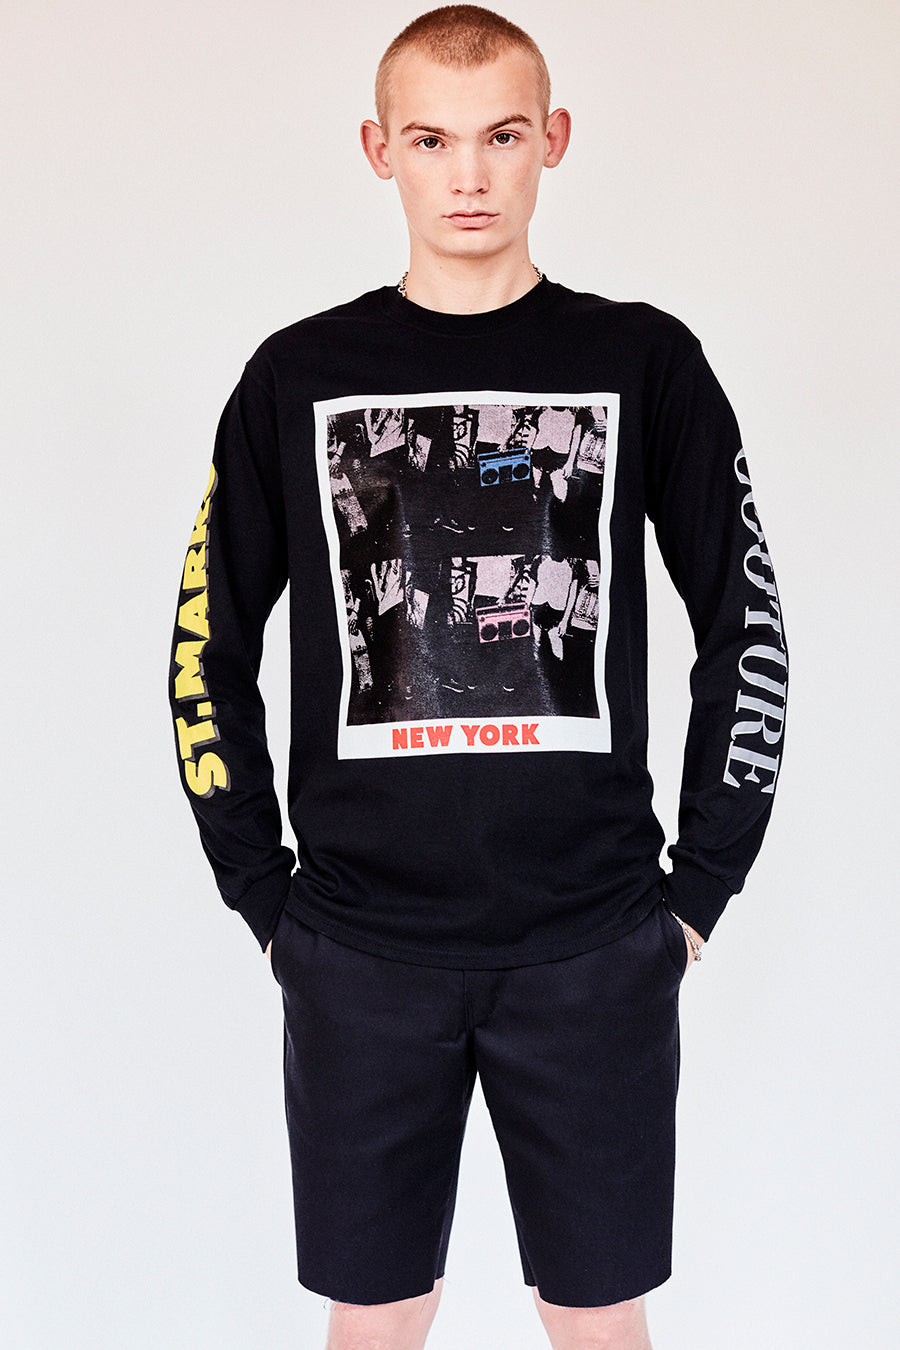 Brand New from New York City: Stmarksnewyork.com. Shop The St. Marks boombox black long sleeve T-shirt: featuring our image from St Marks Place, and the St. Marks Couture New York logo on the back.  Hand silkscreen printed in New York with love.